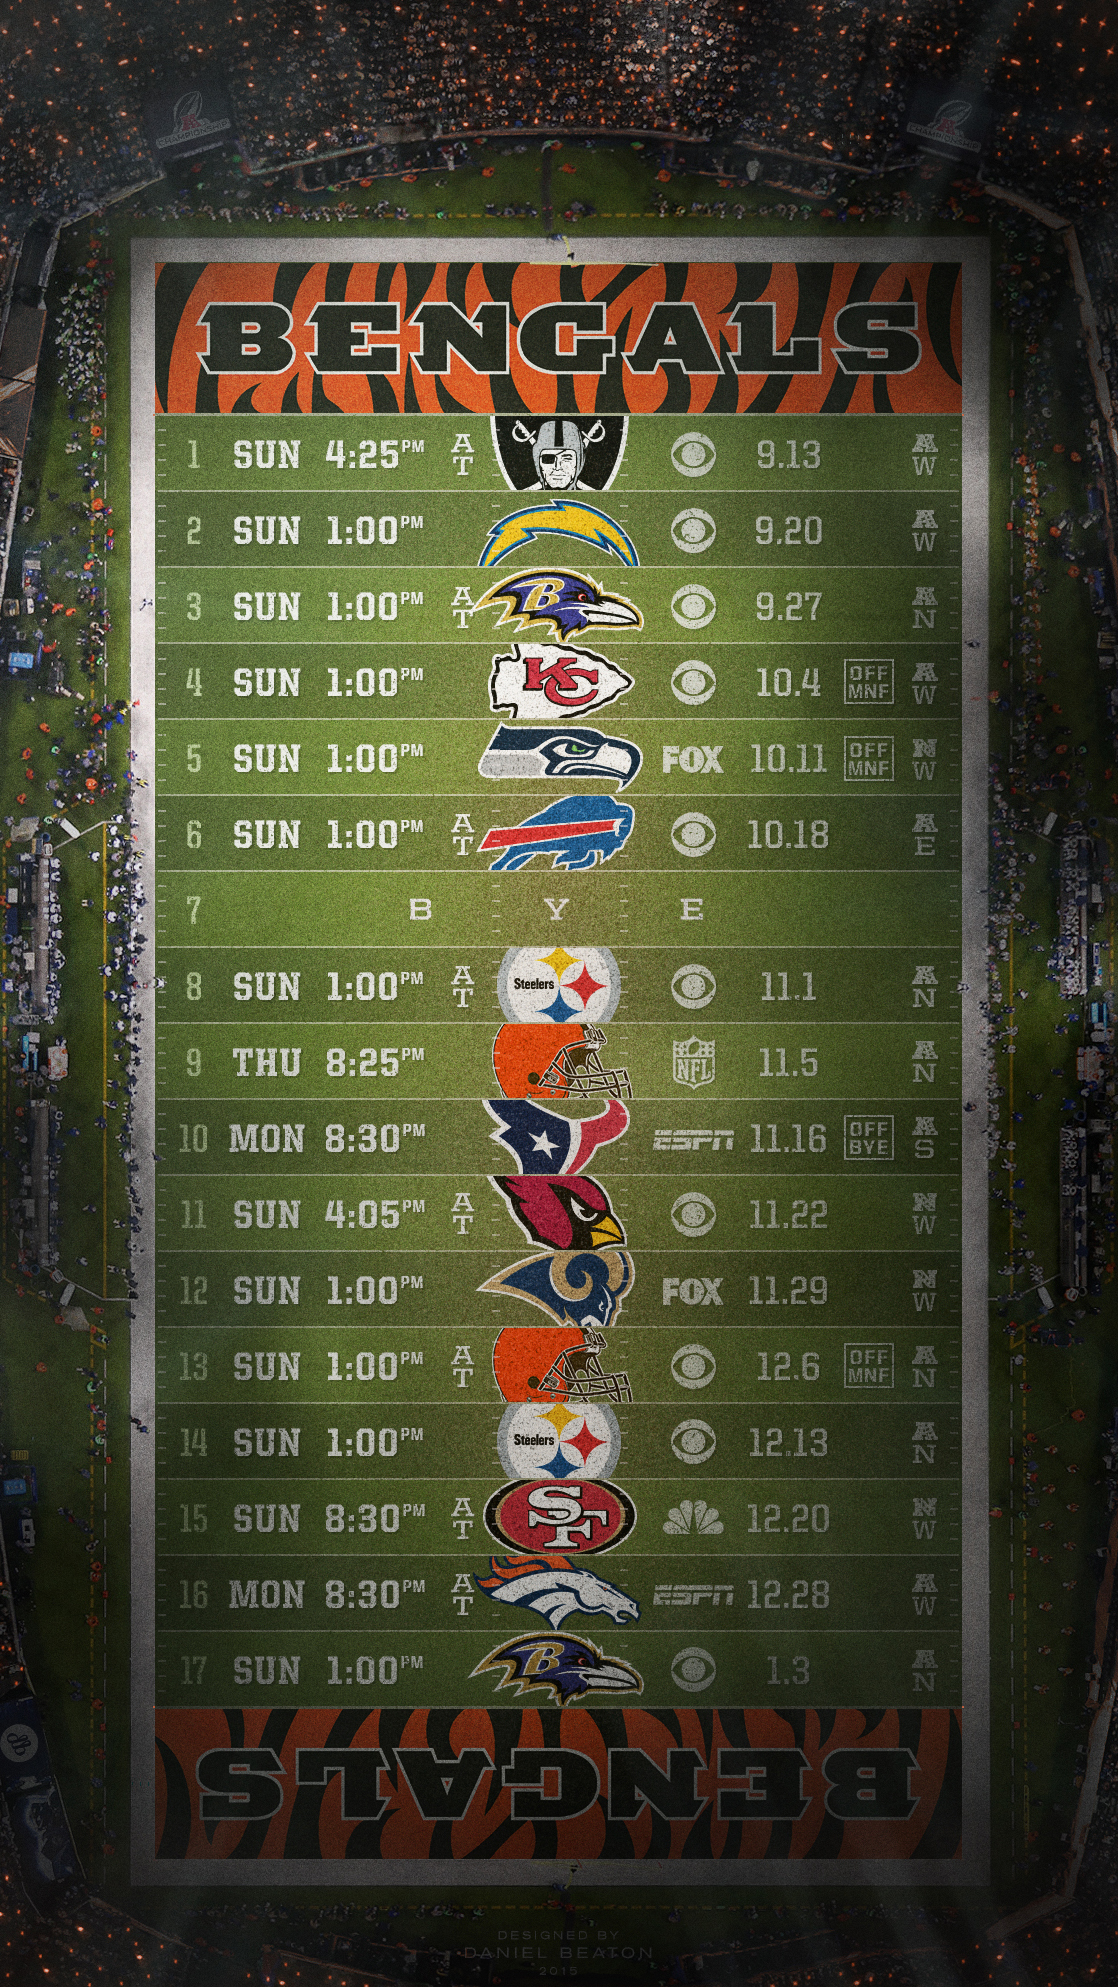 2015 NFL Schedule Wallpapers   Page 3 of 8   NFLRT